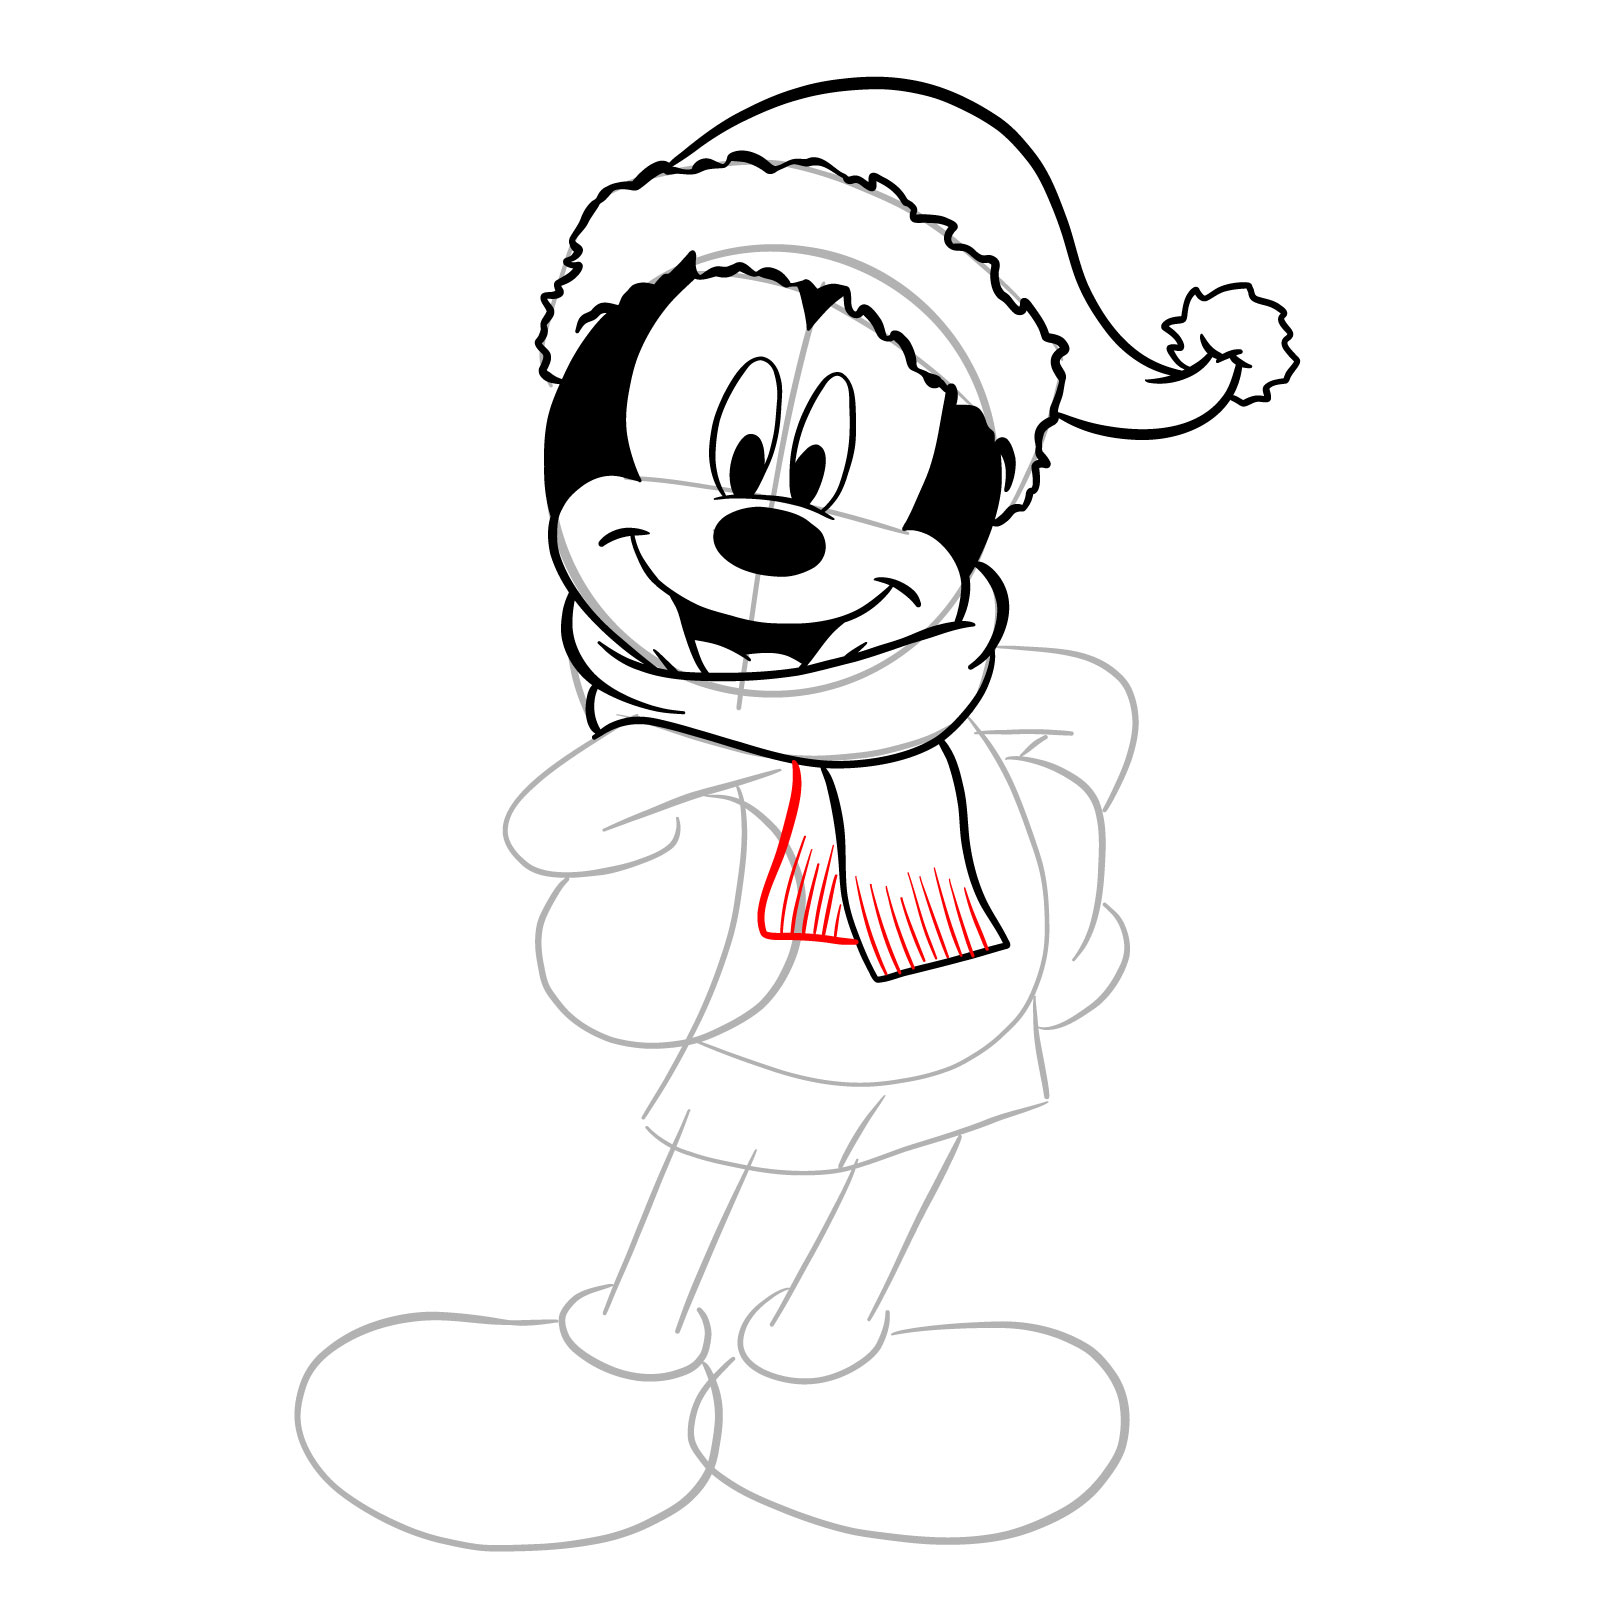 How to draw Santa Mickey Mouse - step 19